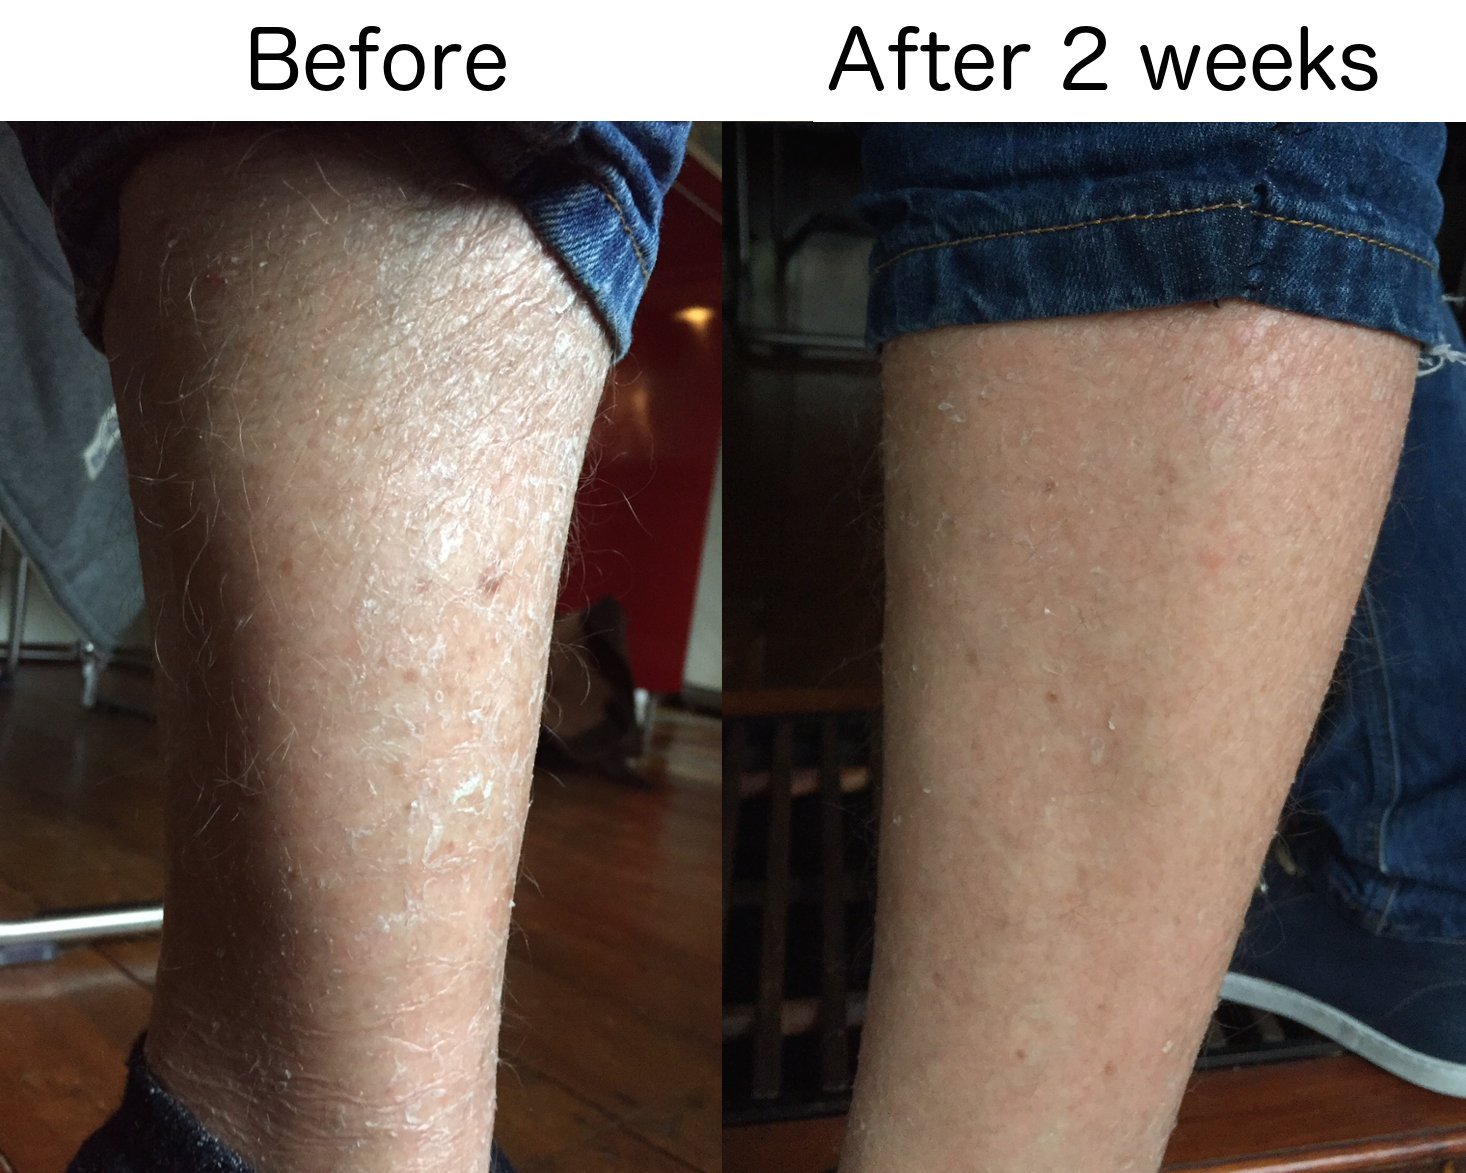 G16 Skin Repair Lotion, Excellent Ichthyosis Treatment Cream, Outstanding Results in 2 Weeks by G16